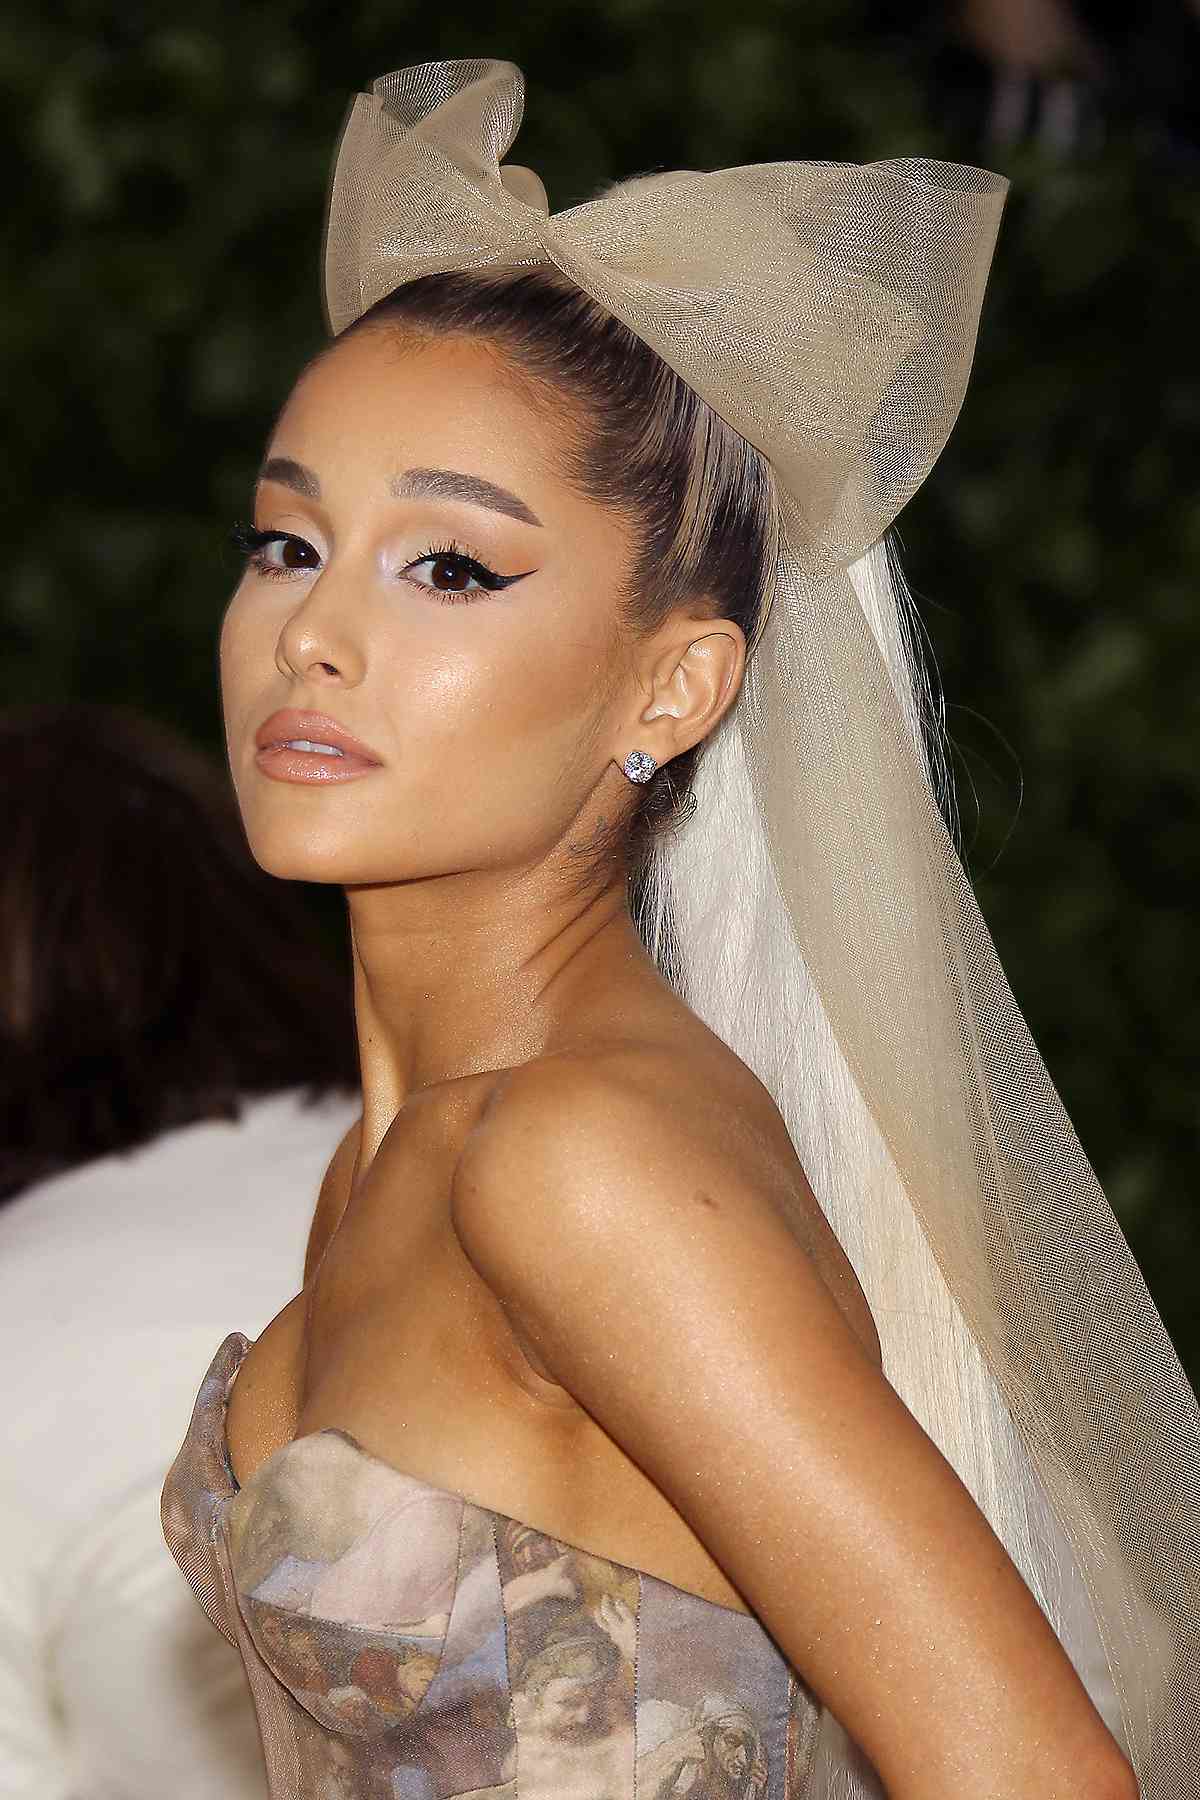 The Costume Institute Benefit Celebrating the exhibition 'Heavenly Bodies: Fashion and The Catholic Imagination' on view from May 10 through October 8, 2018, Met Gala, New York, USA - 07 May 2018